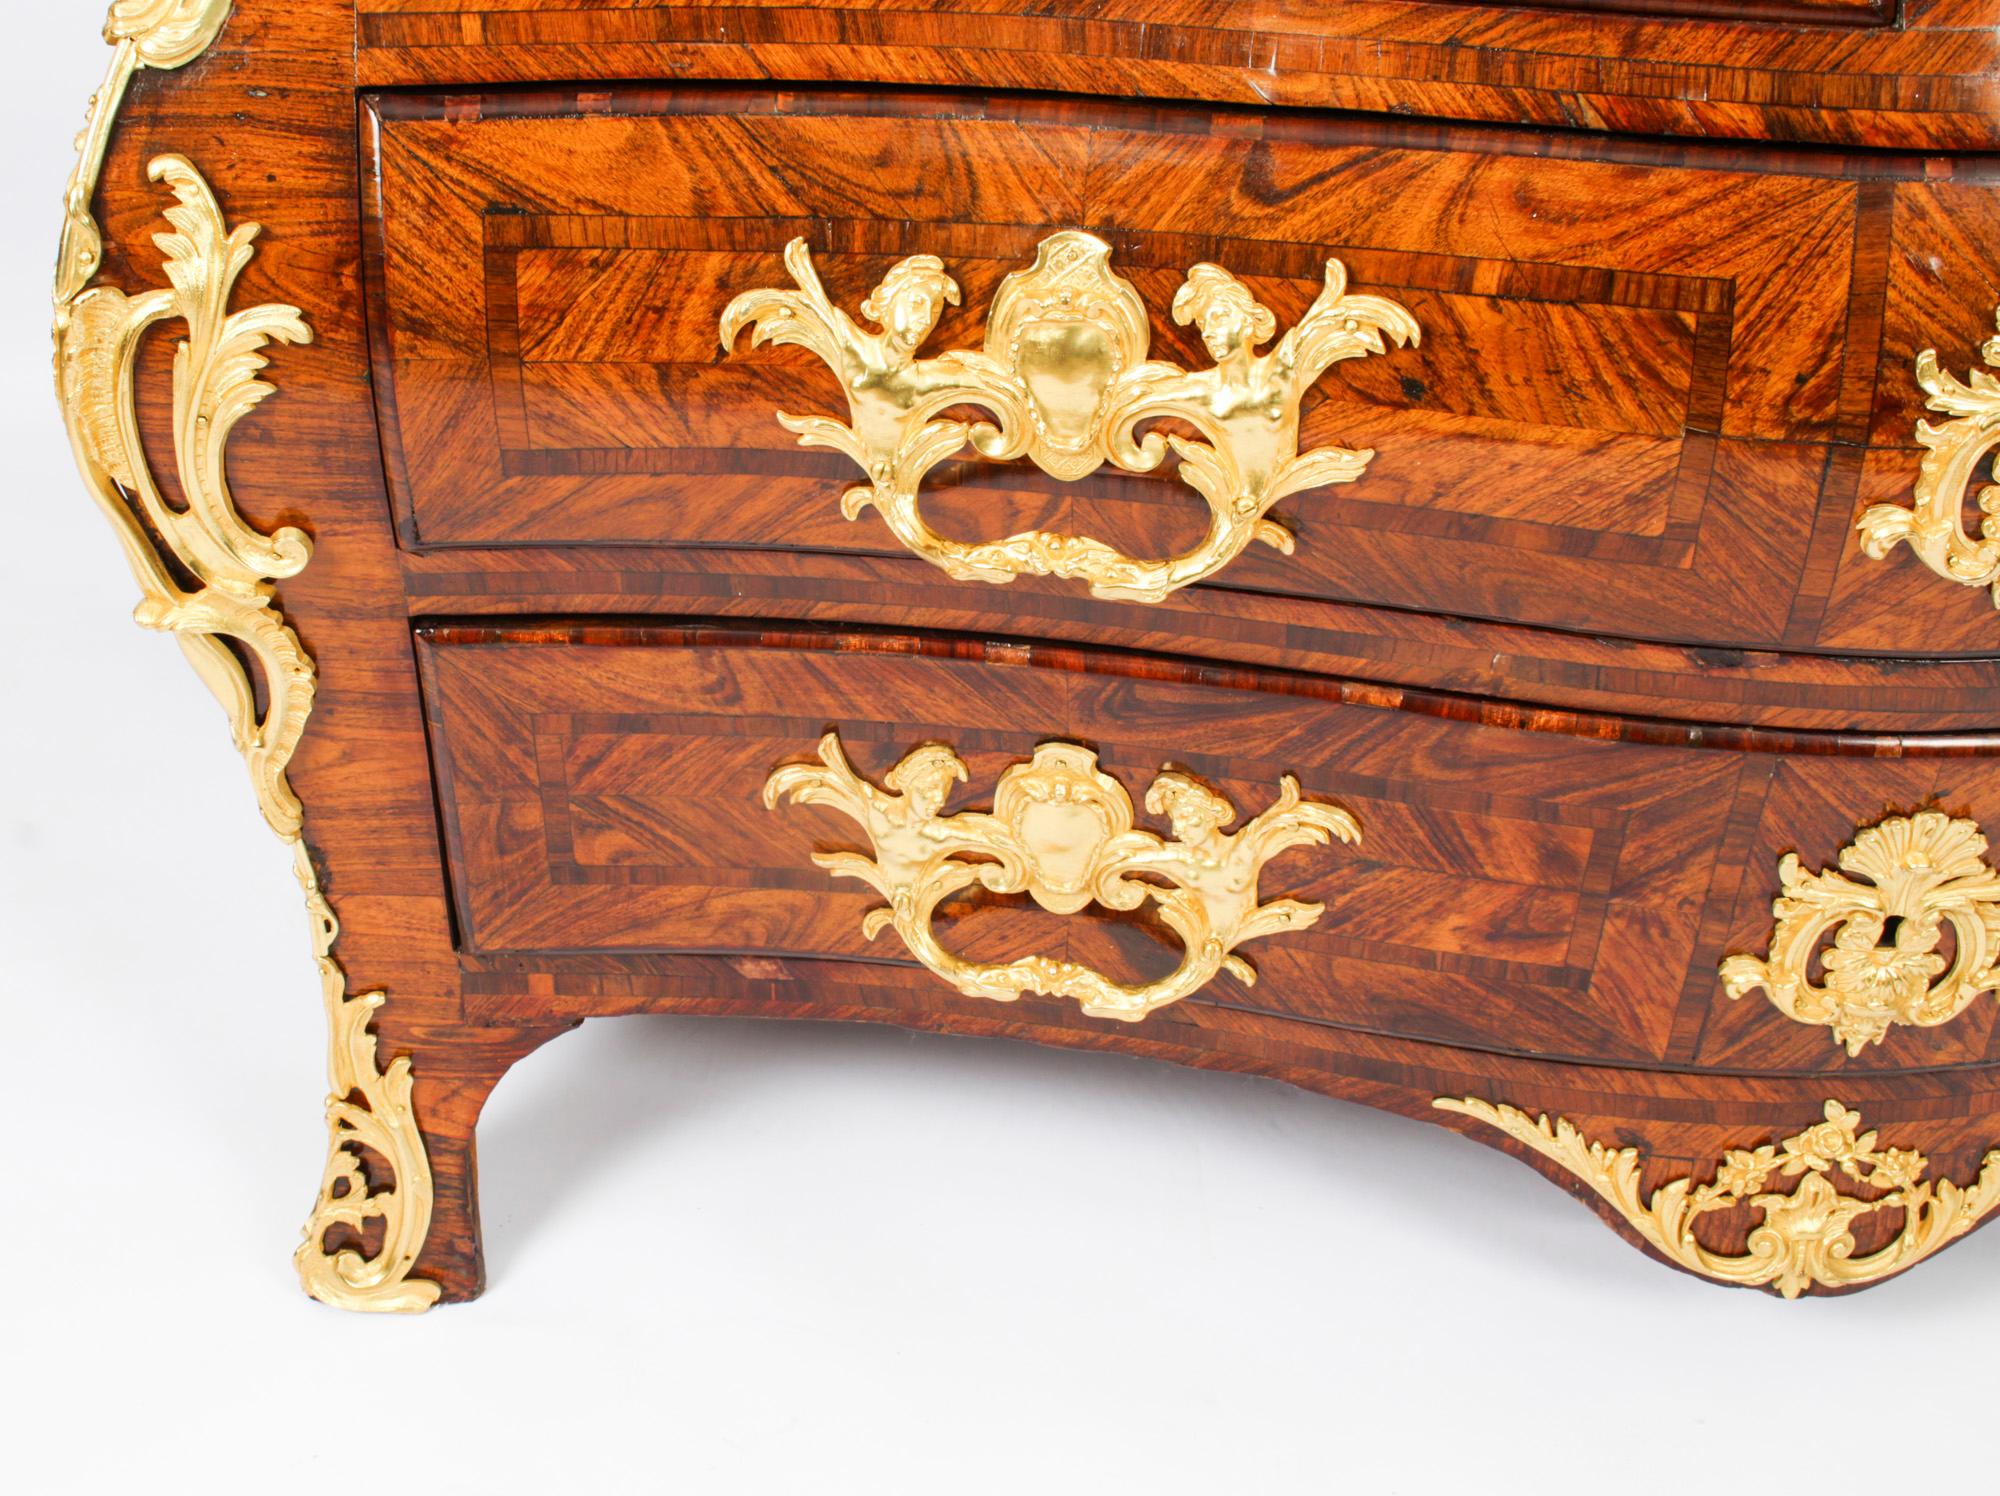 Antique French Régence Ormolu Mounted Commode 18th Century For Sale 2